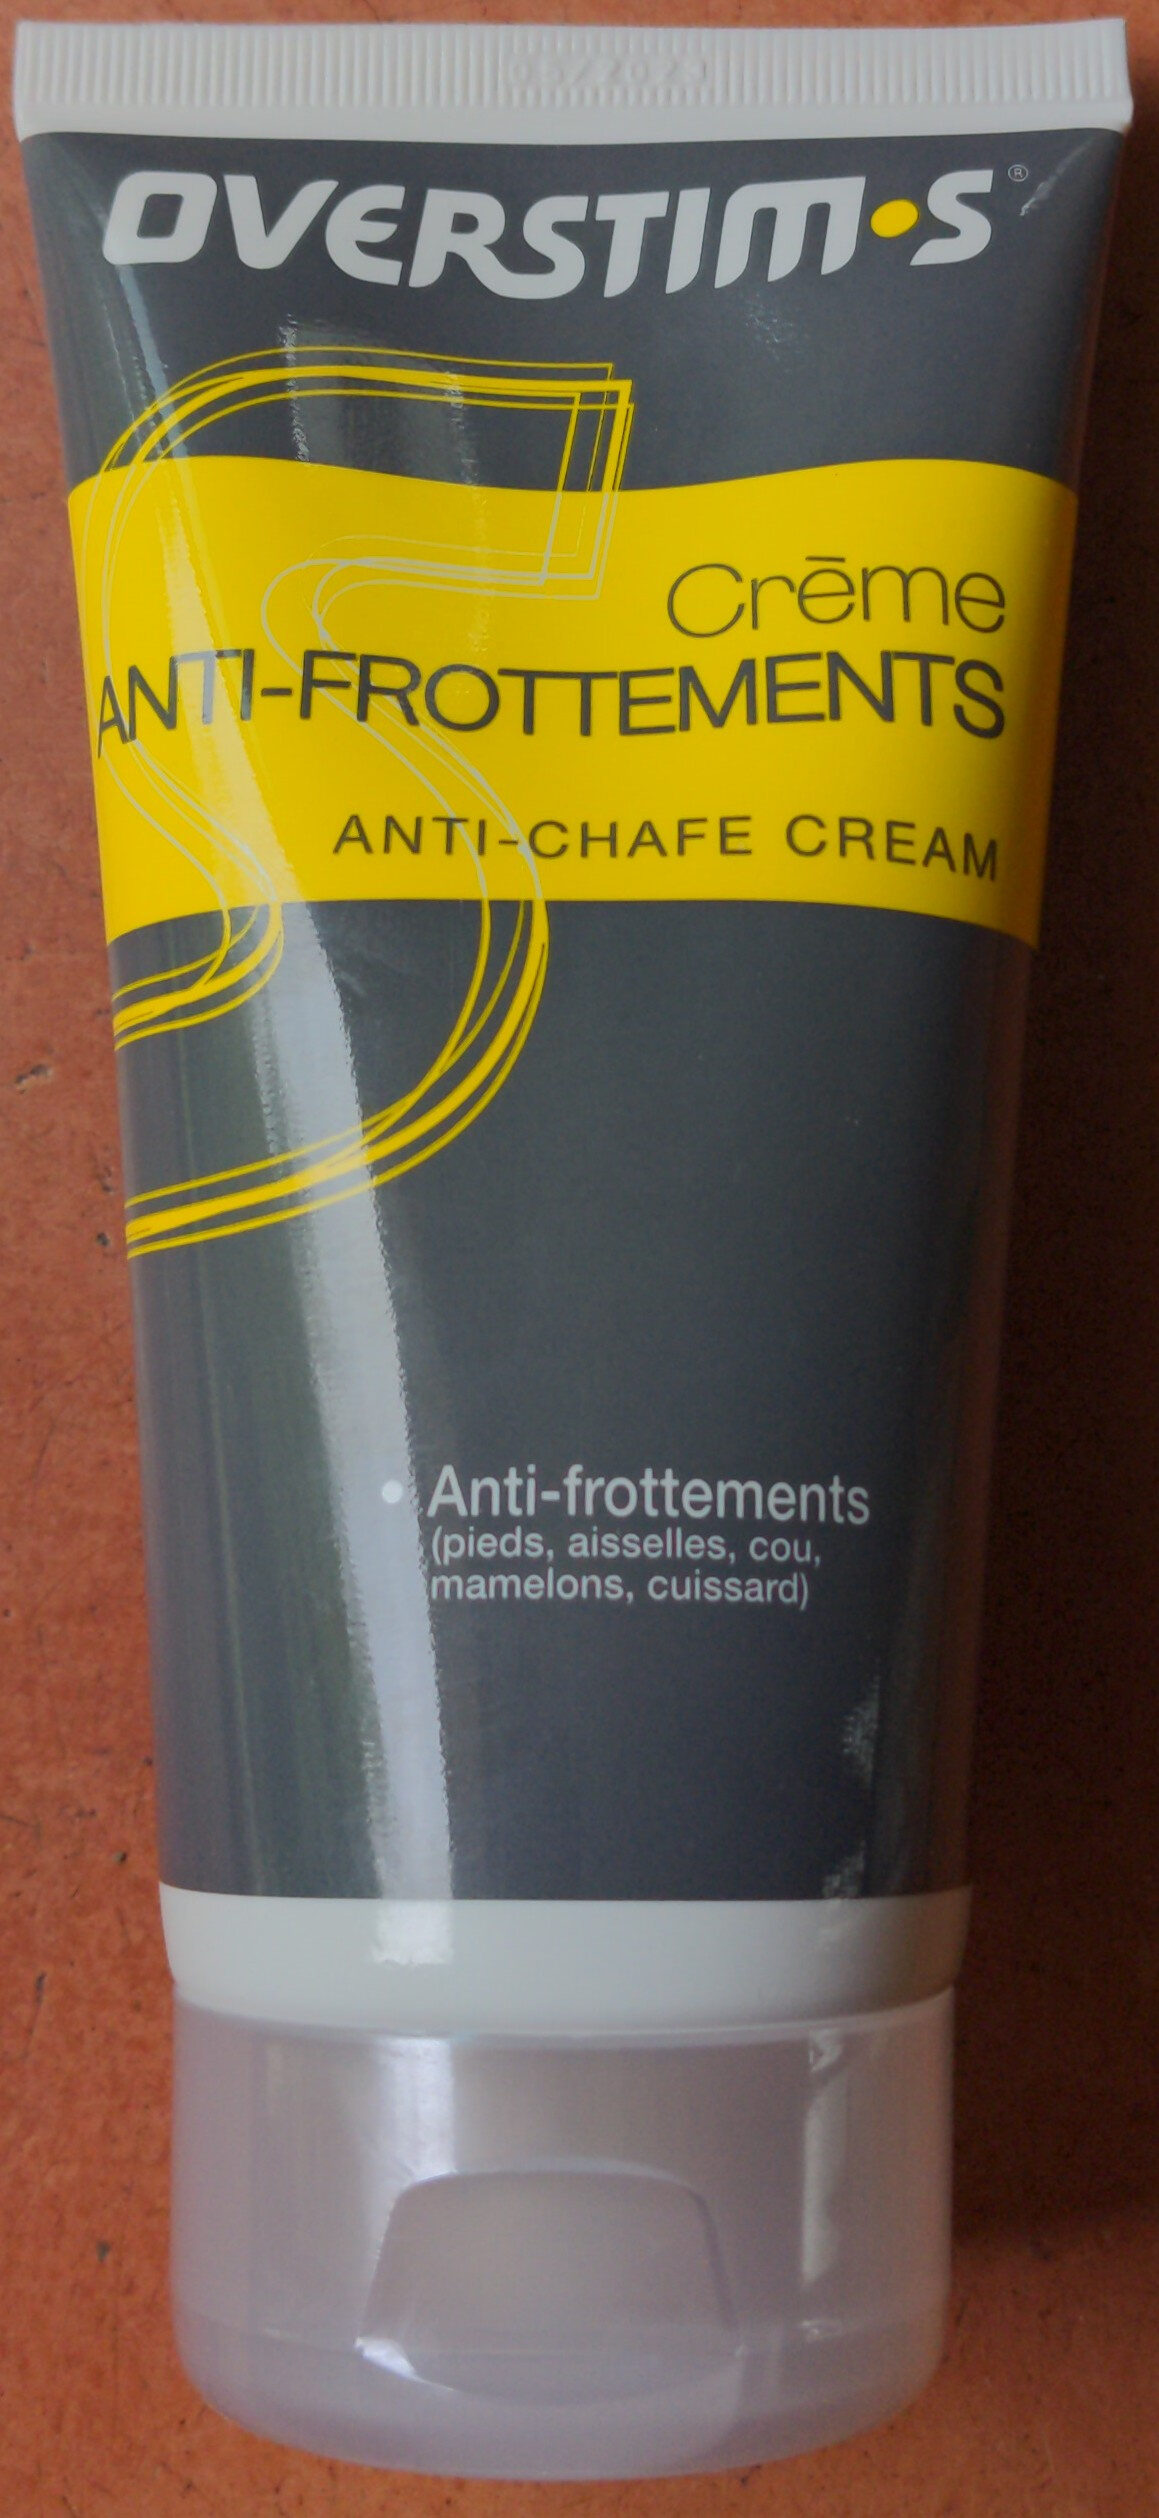 Crème anti-frottements - Tuote - fr